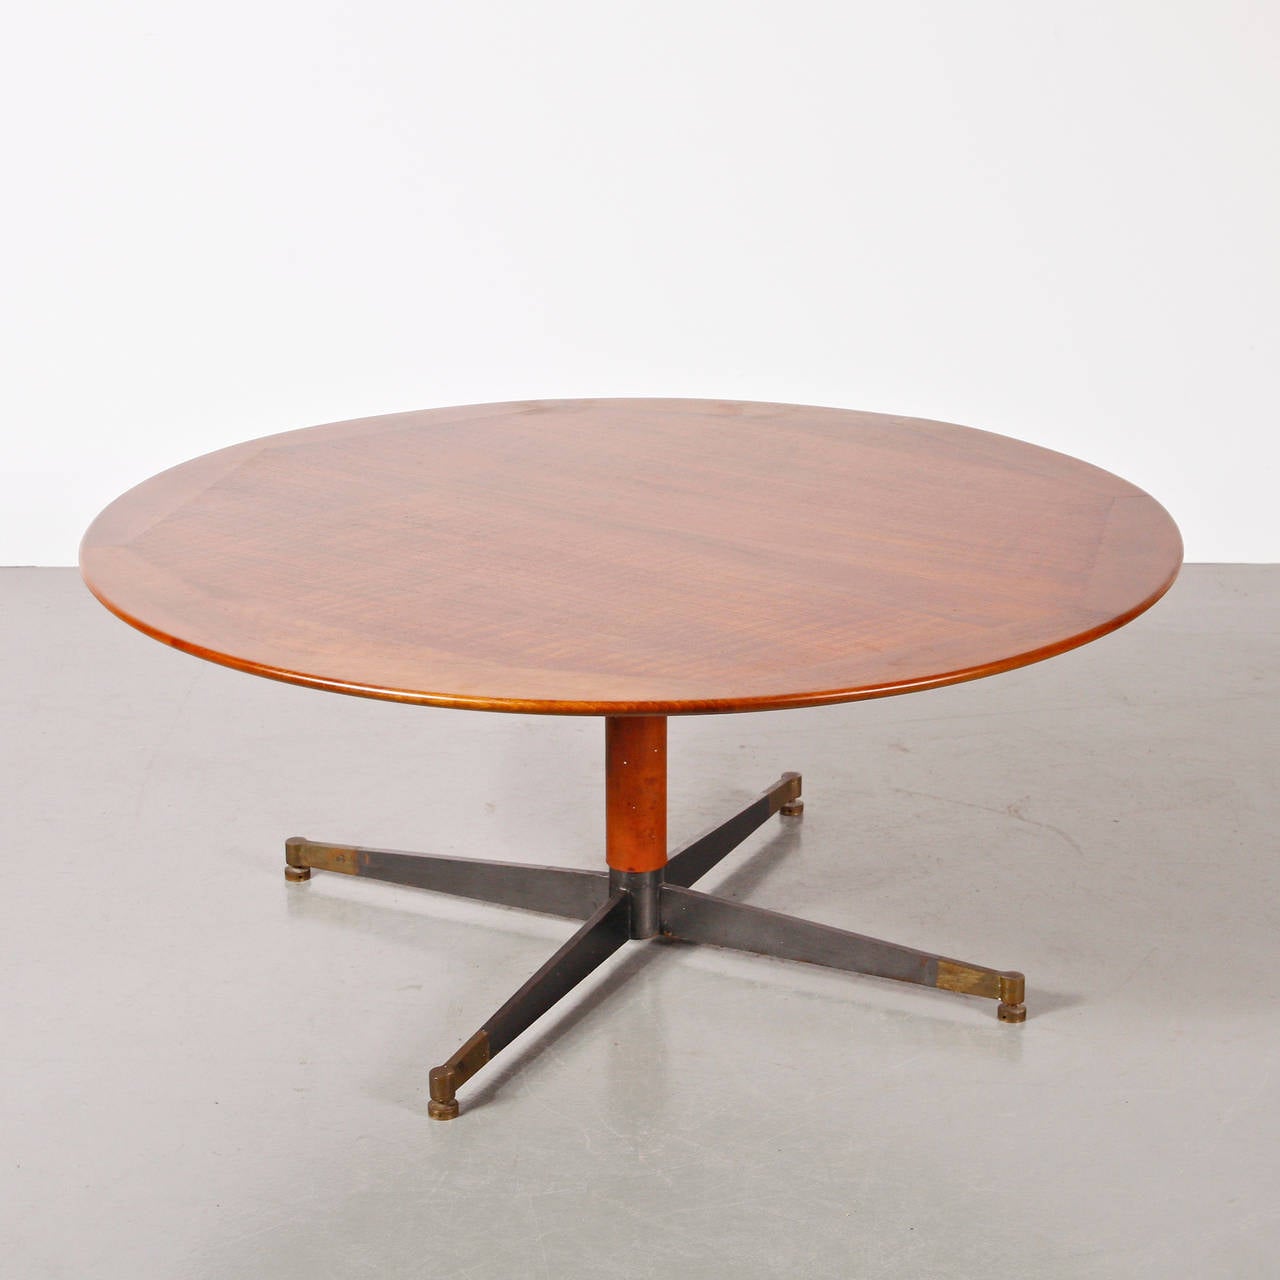 Coffee table designed by Jacques Adnet.
Manufactured in France, circa 1950.
Oak table top, lacquered base and structure with leather and brass details.

In good original condition, with minor wear consistent with age and use, preserving a